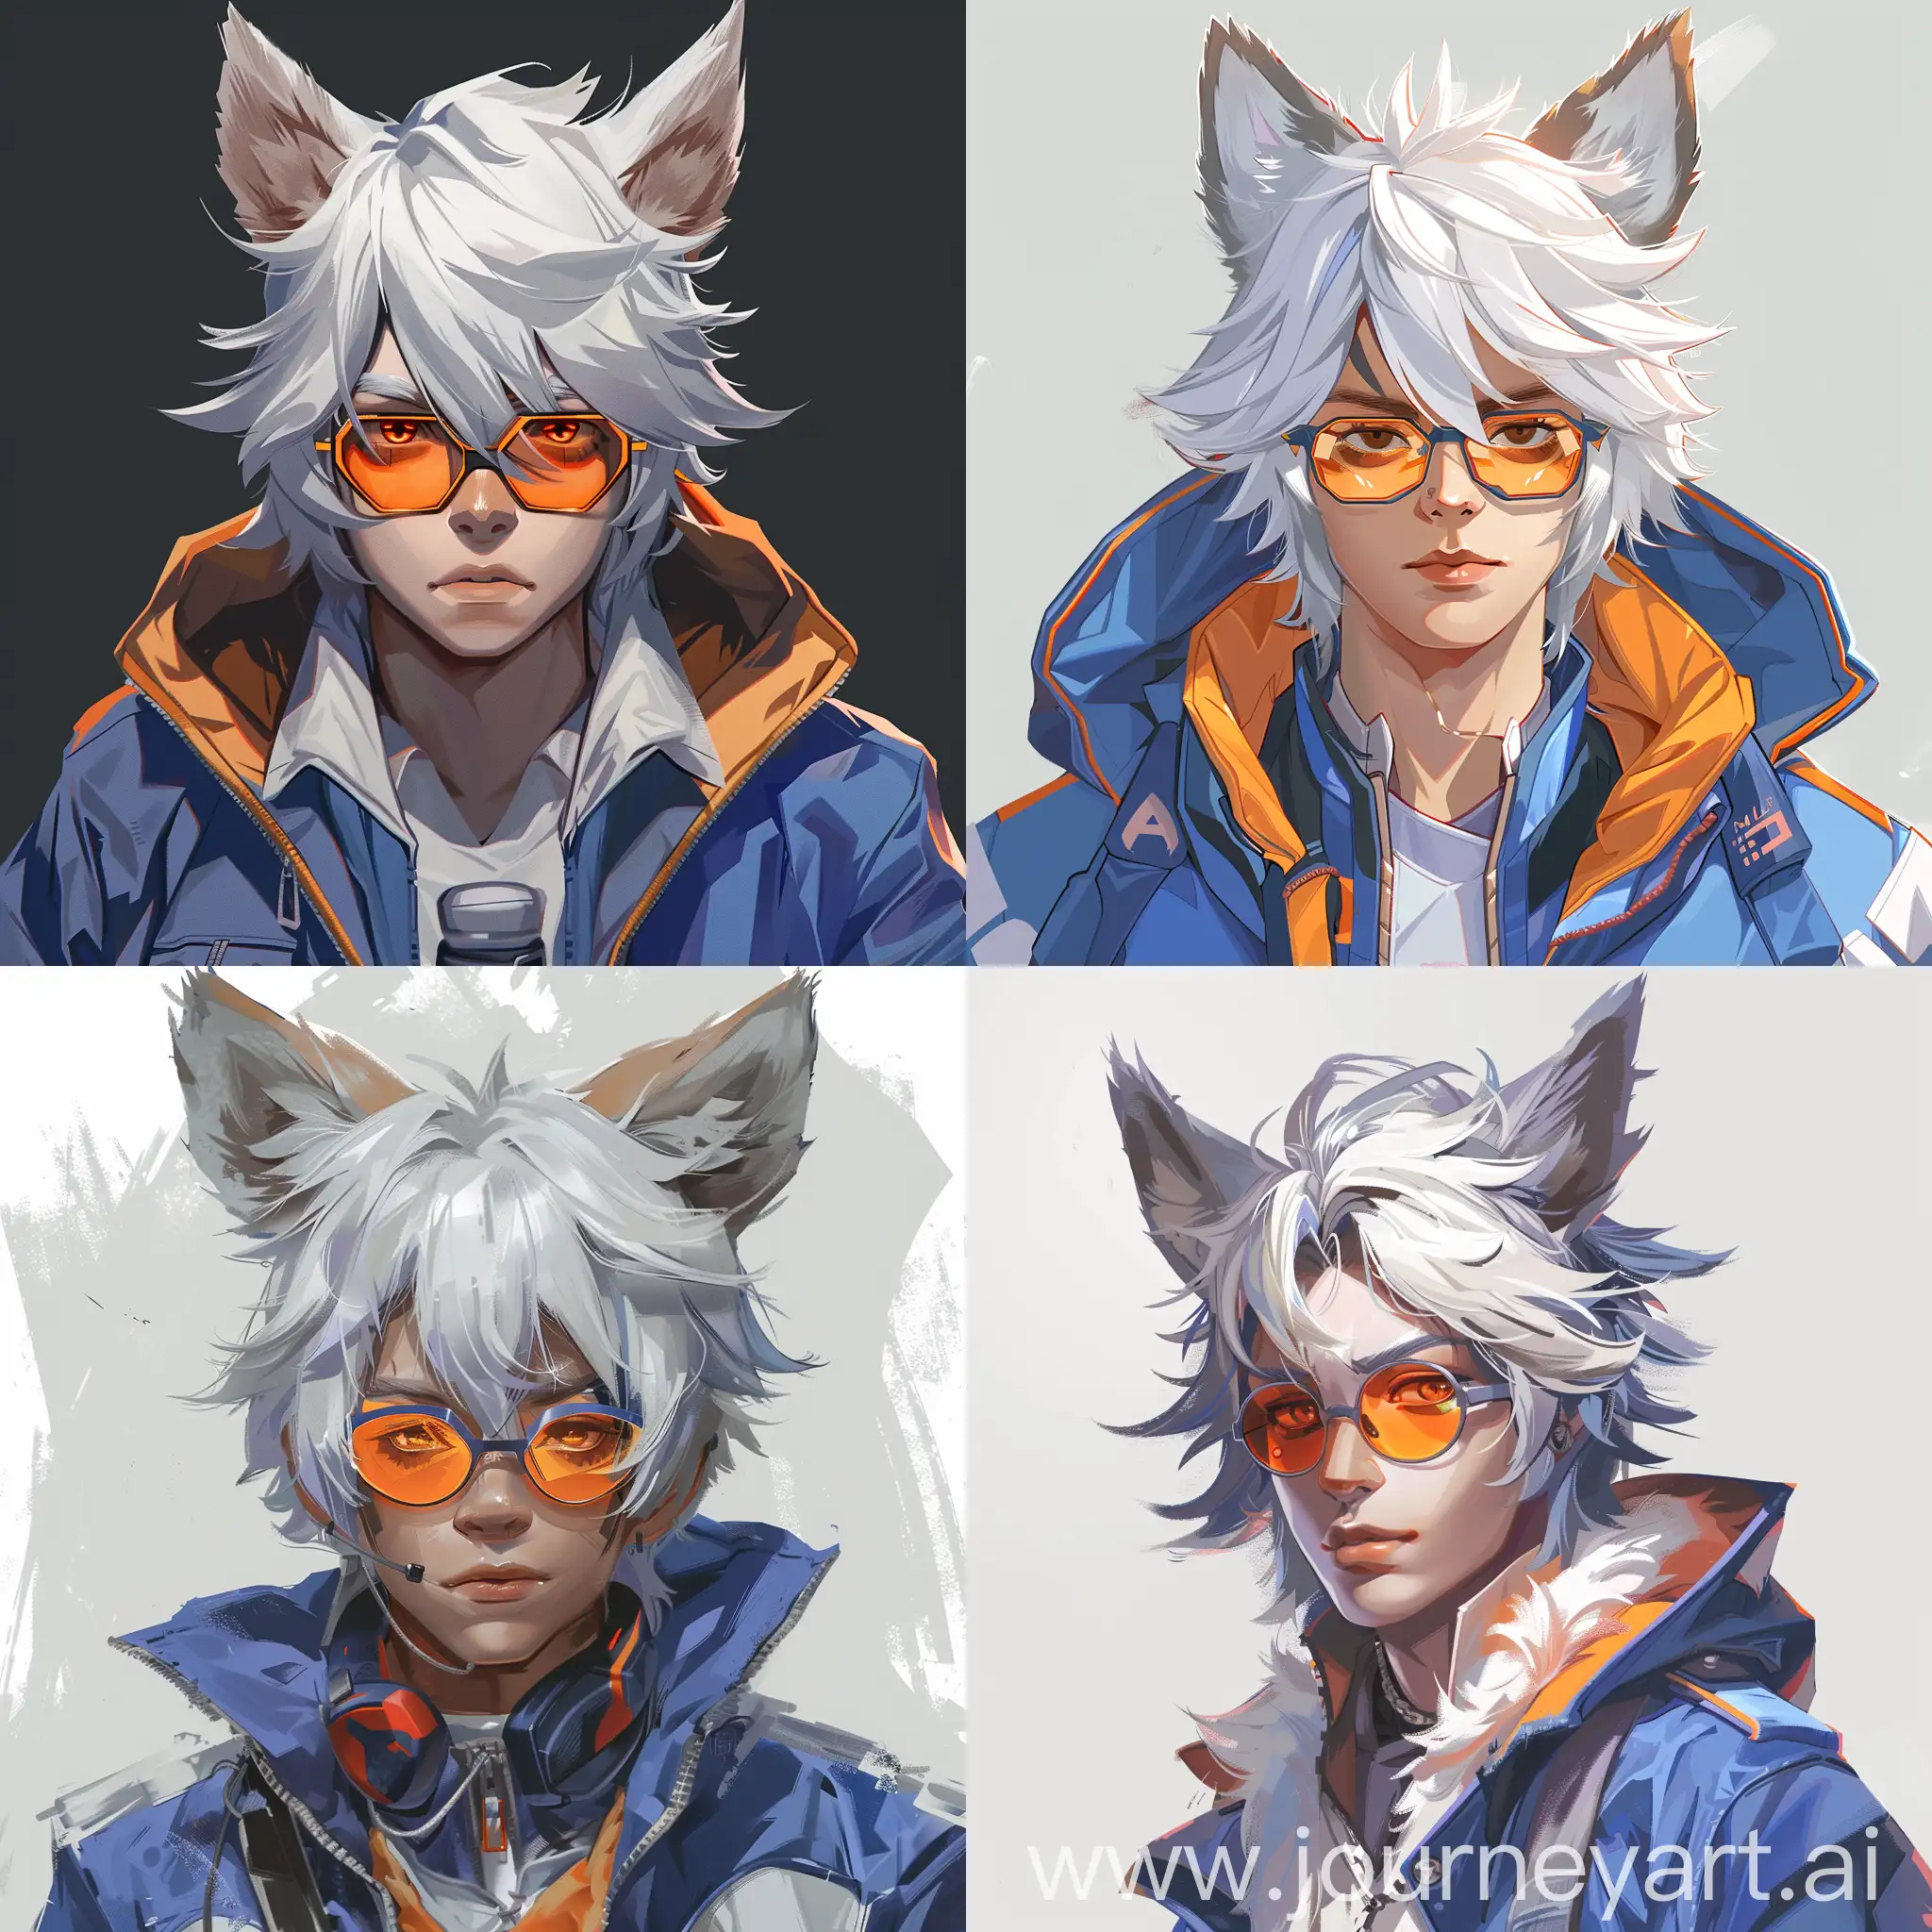 Arknights-Young-Man-with-Wolf-Ears-and-Blue-Jacket-Portrait-Illustration